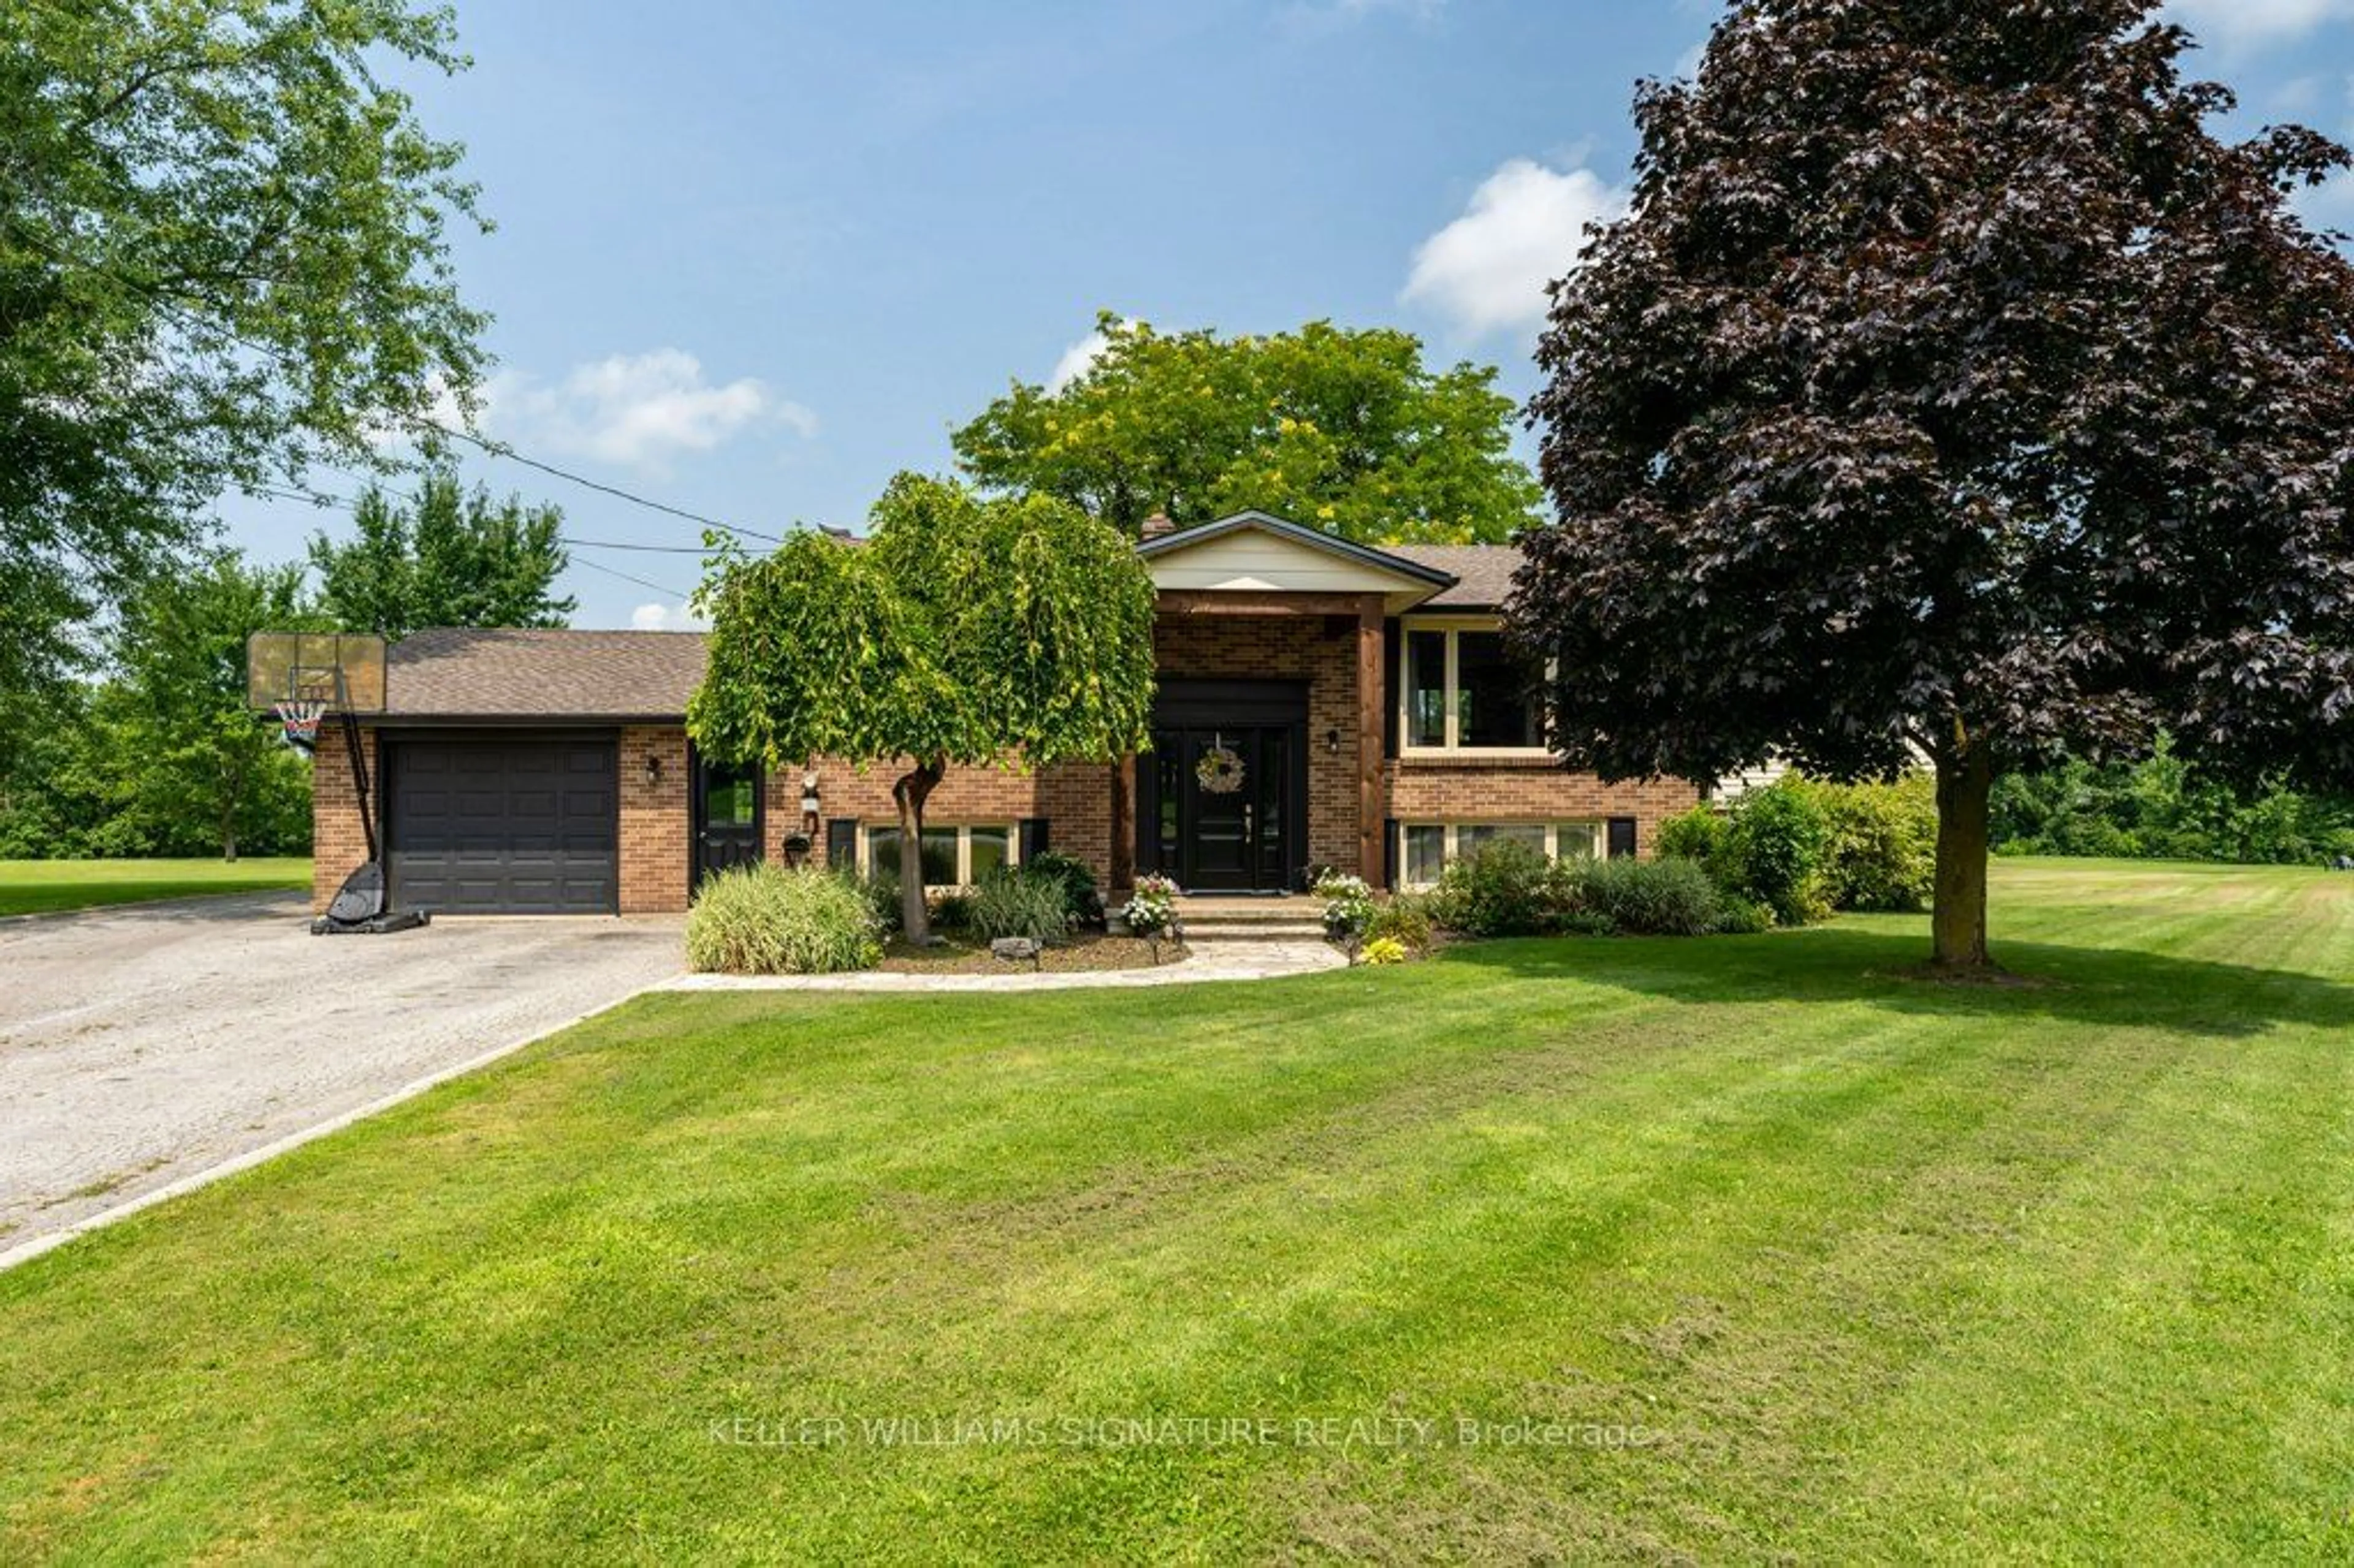 Home with brick exterior material for 4999 Canborough Rd, West Lincoln Ontario L0R 2J0